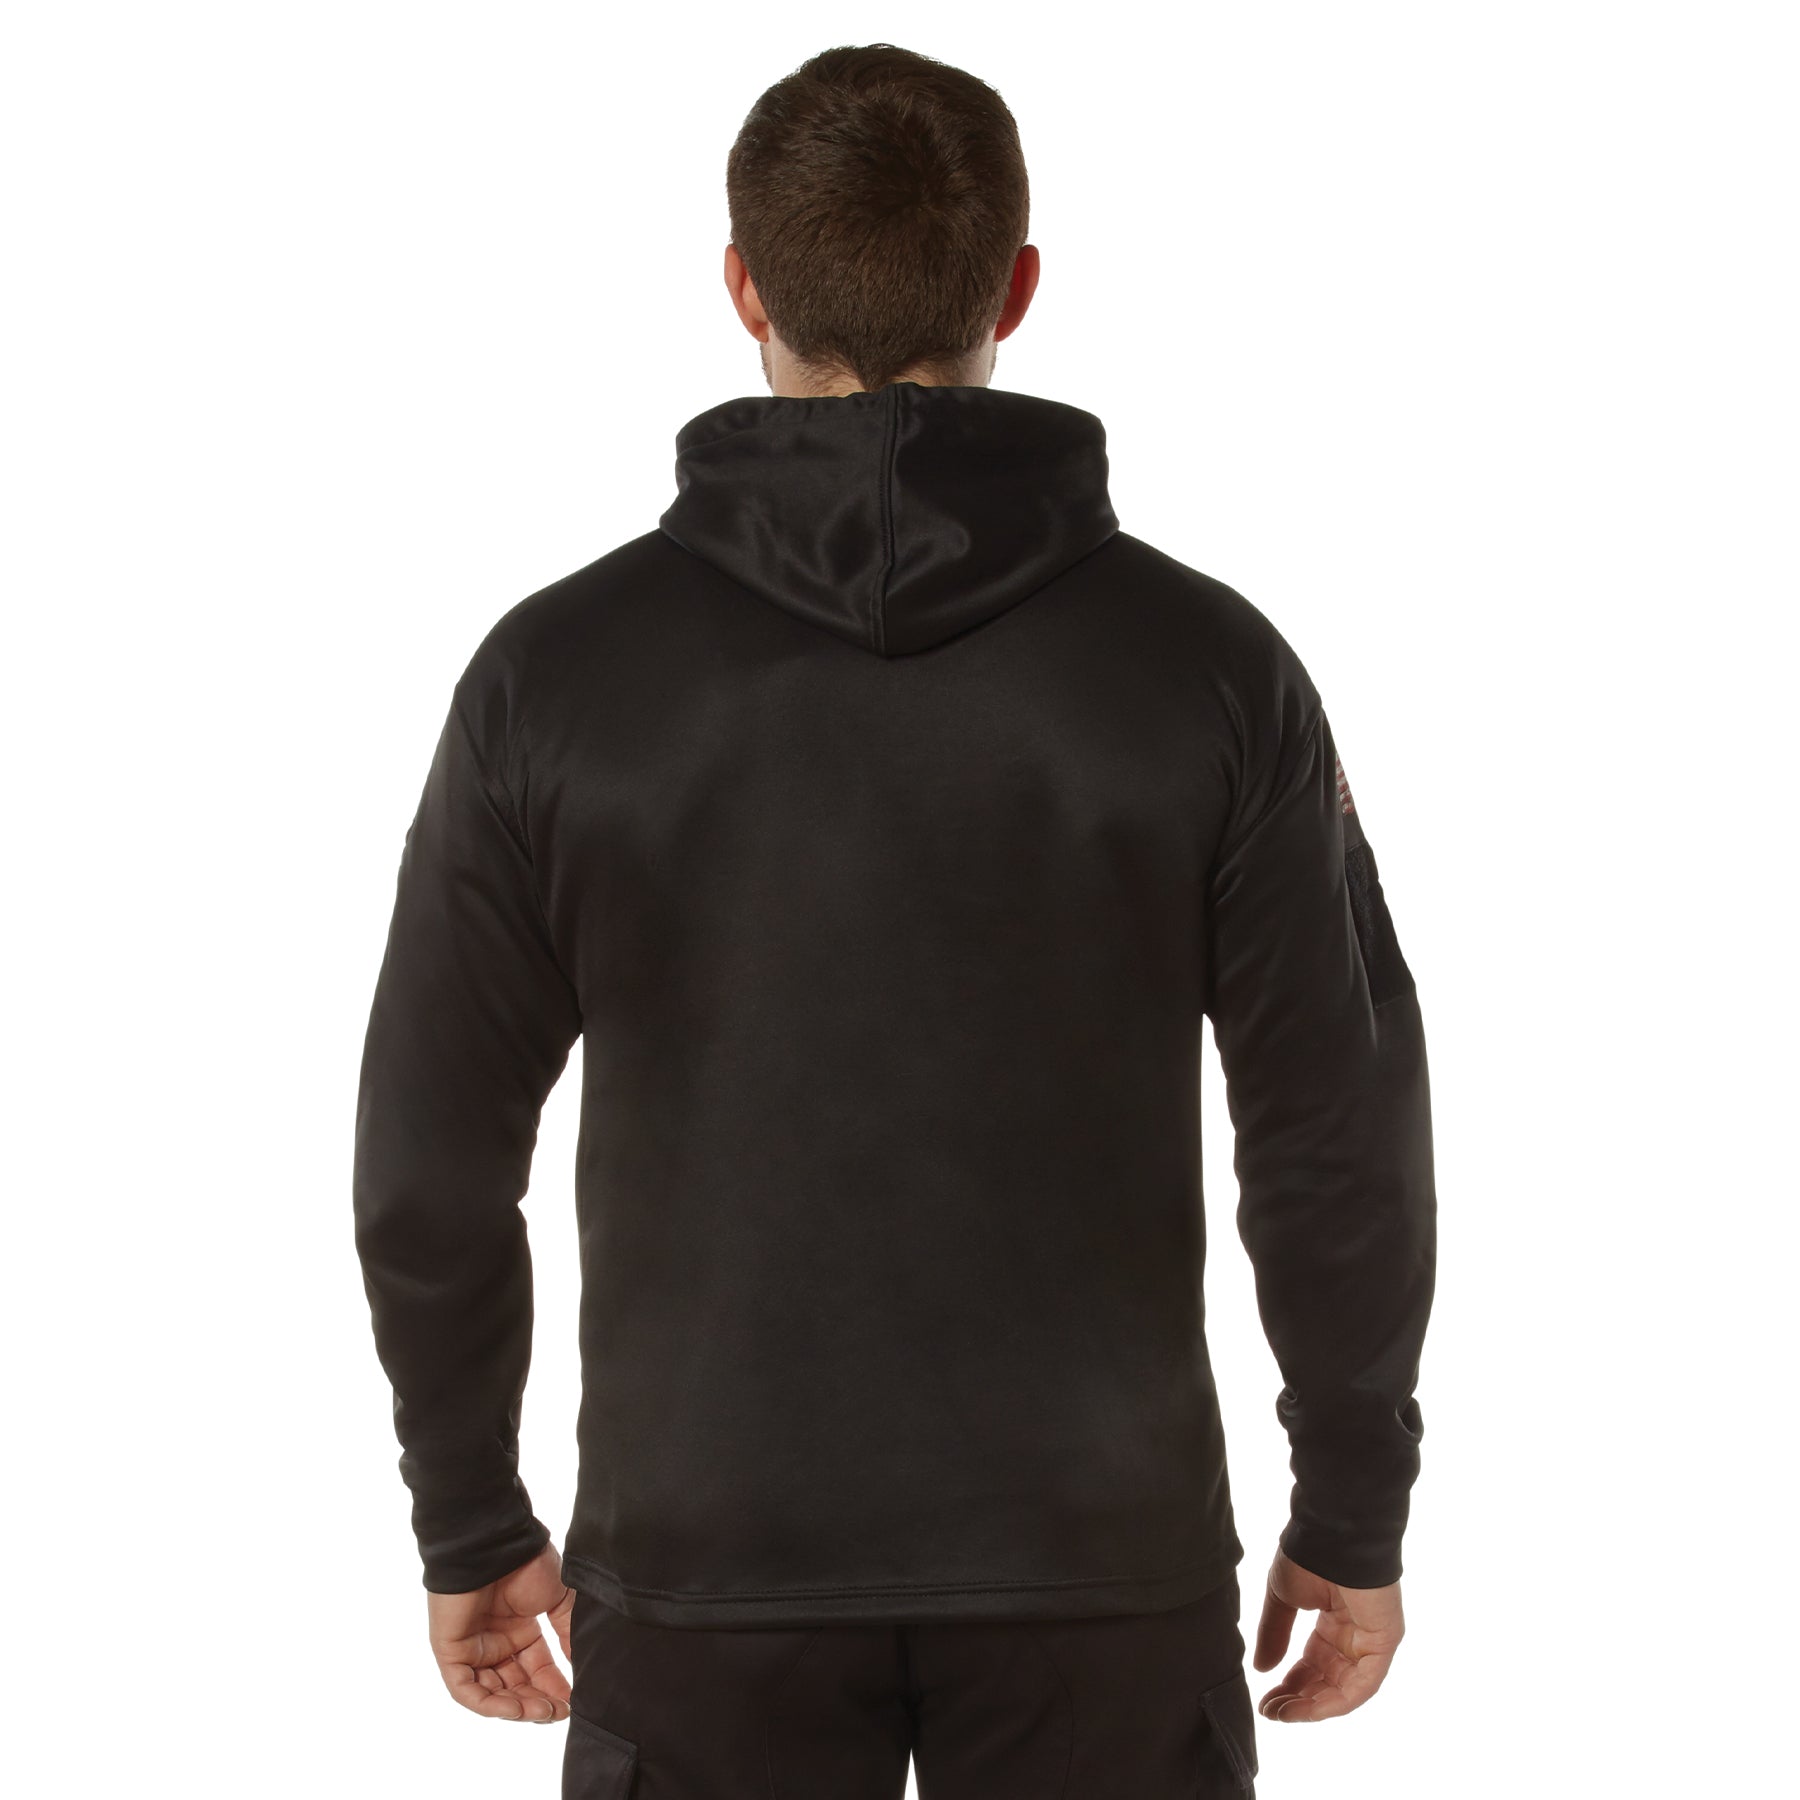 Poly US Flag Concealed Carry Hooded Sweatshirts